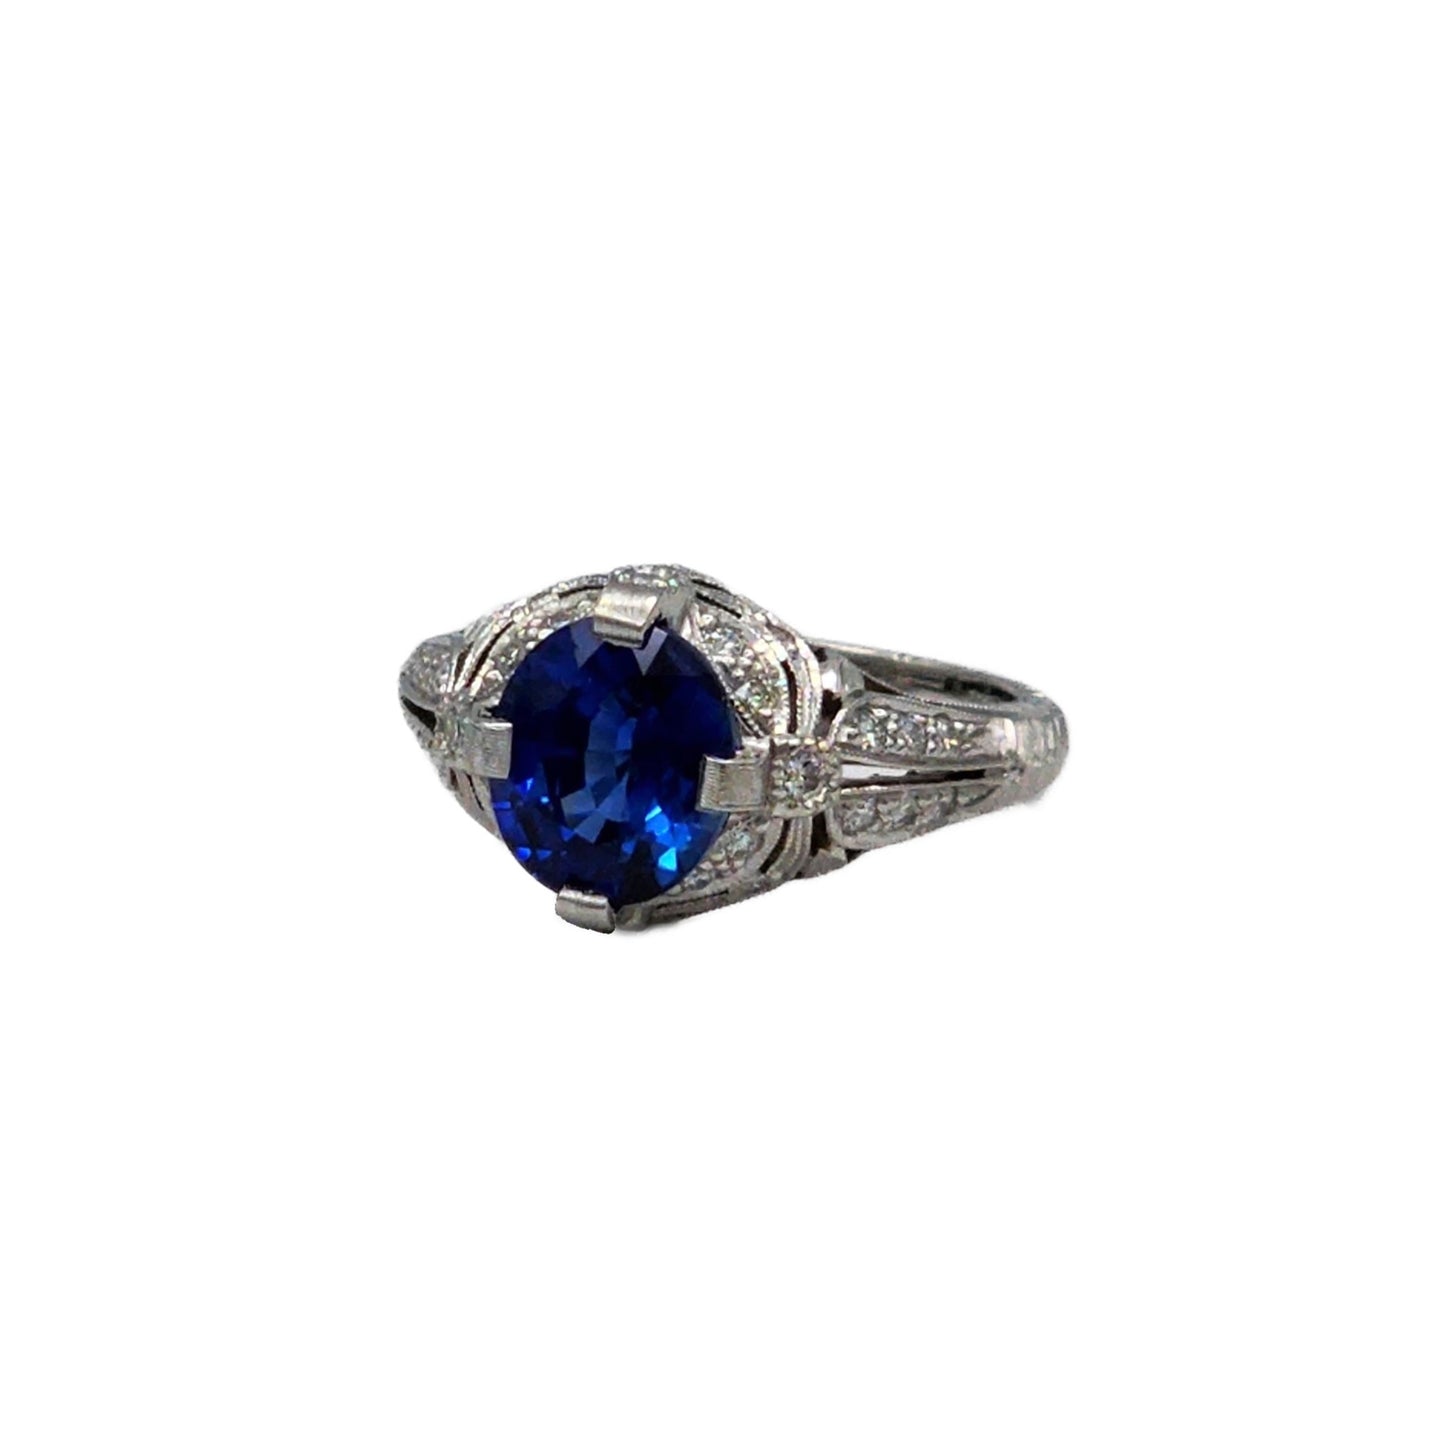 3.03 Carat Oval Sapphire and 28=0.35 Carat Diamond Ring by Whitehouse Brothers in Platinum, GIA Report